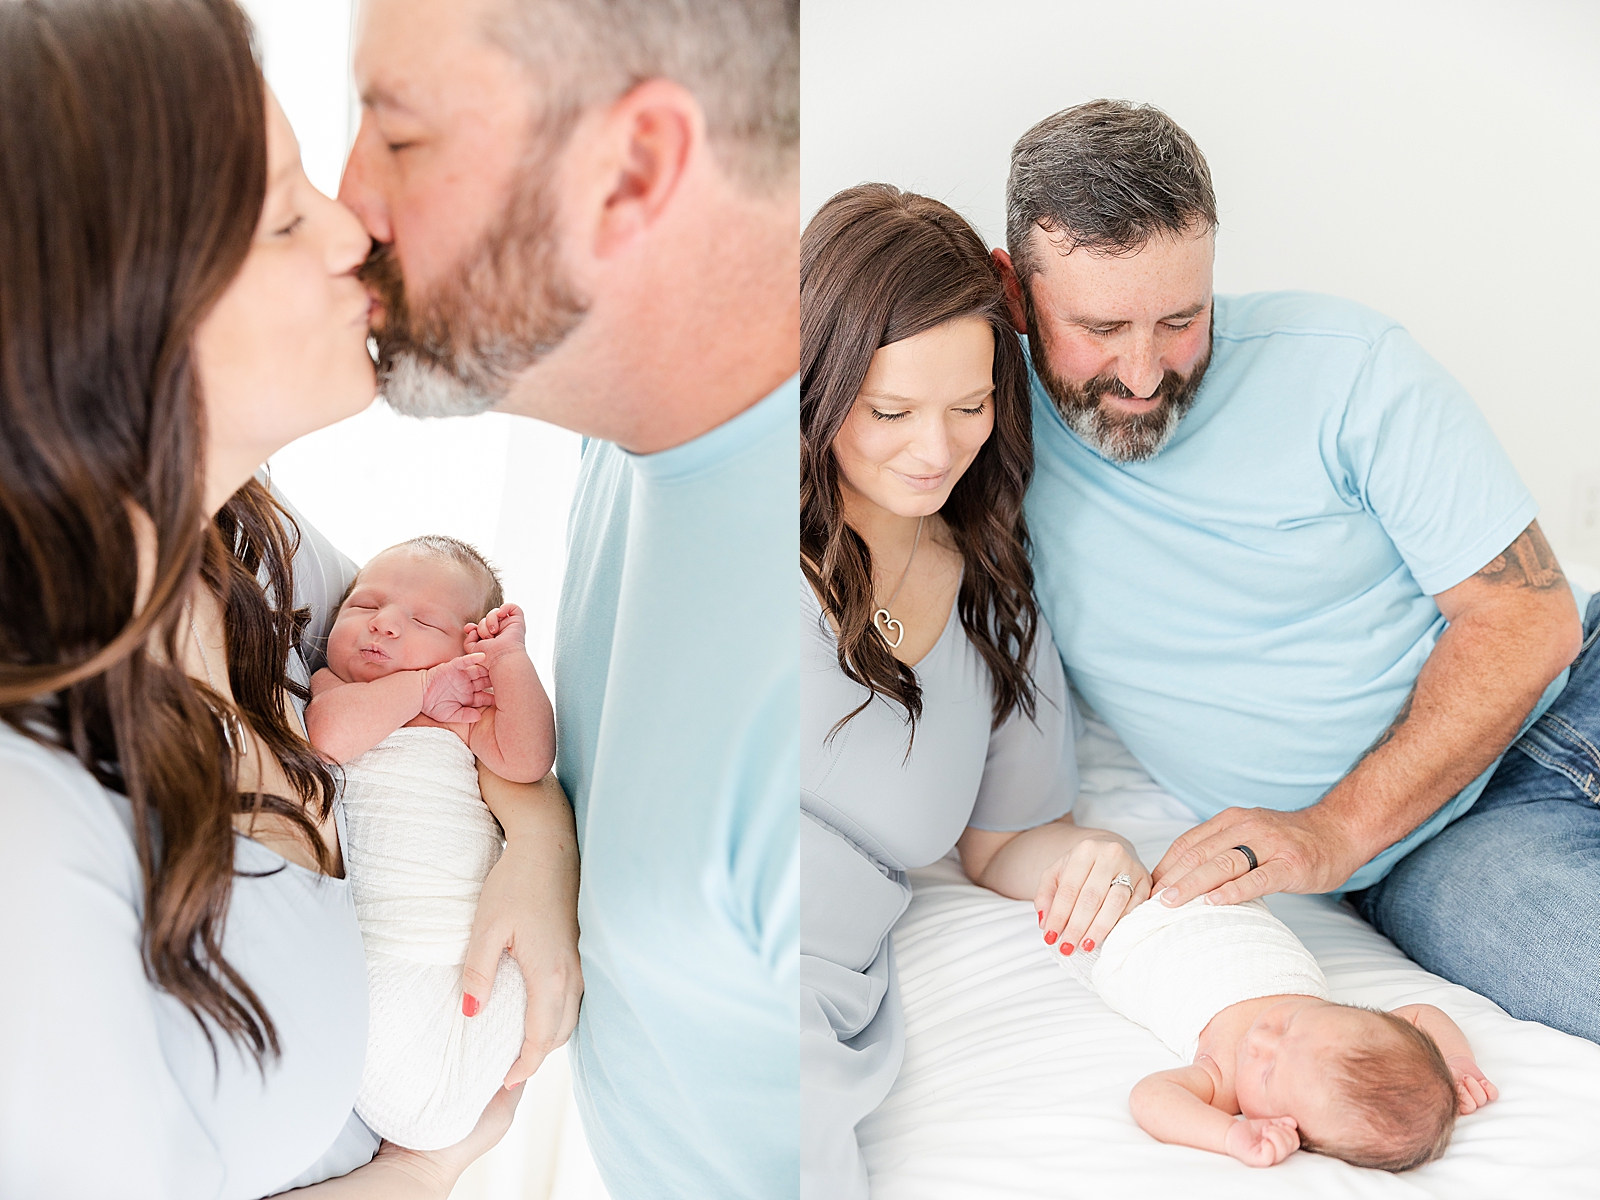 newborn photos of mom and dad sitting on bed with hands on swaddled baby smiling down at him and sharing a kiss while holding baby also making a kissy face